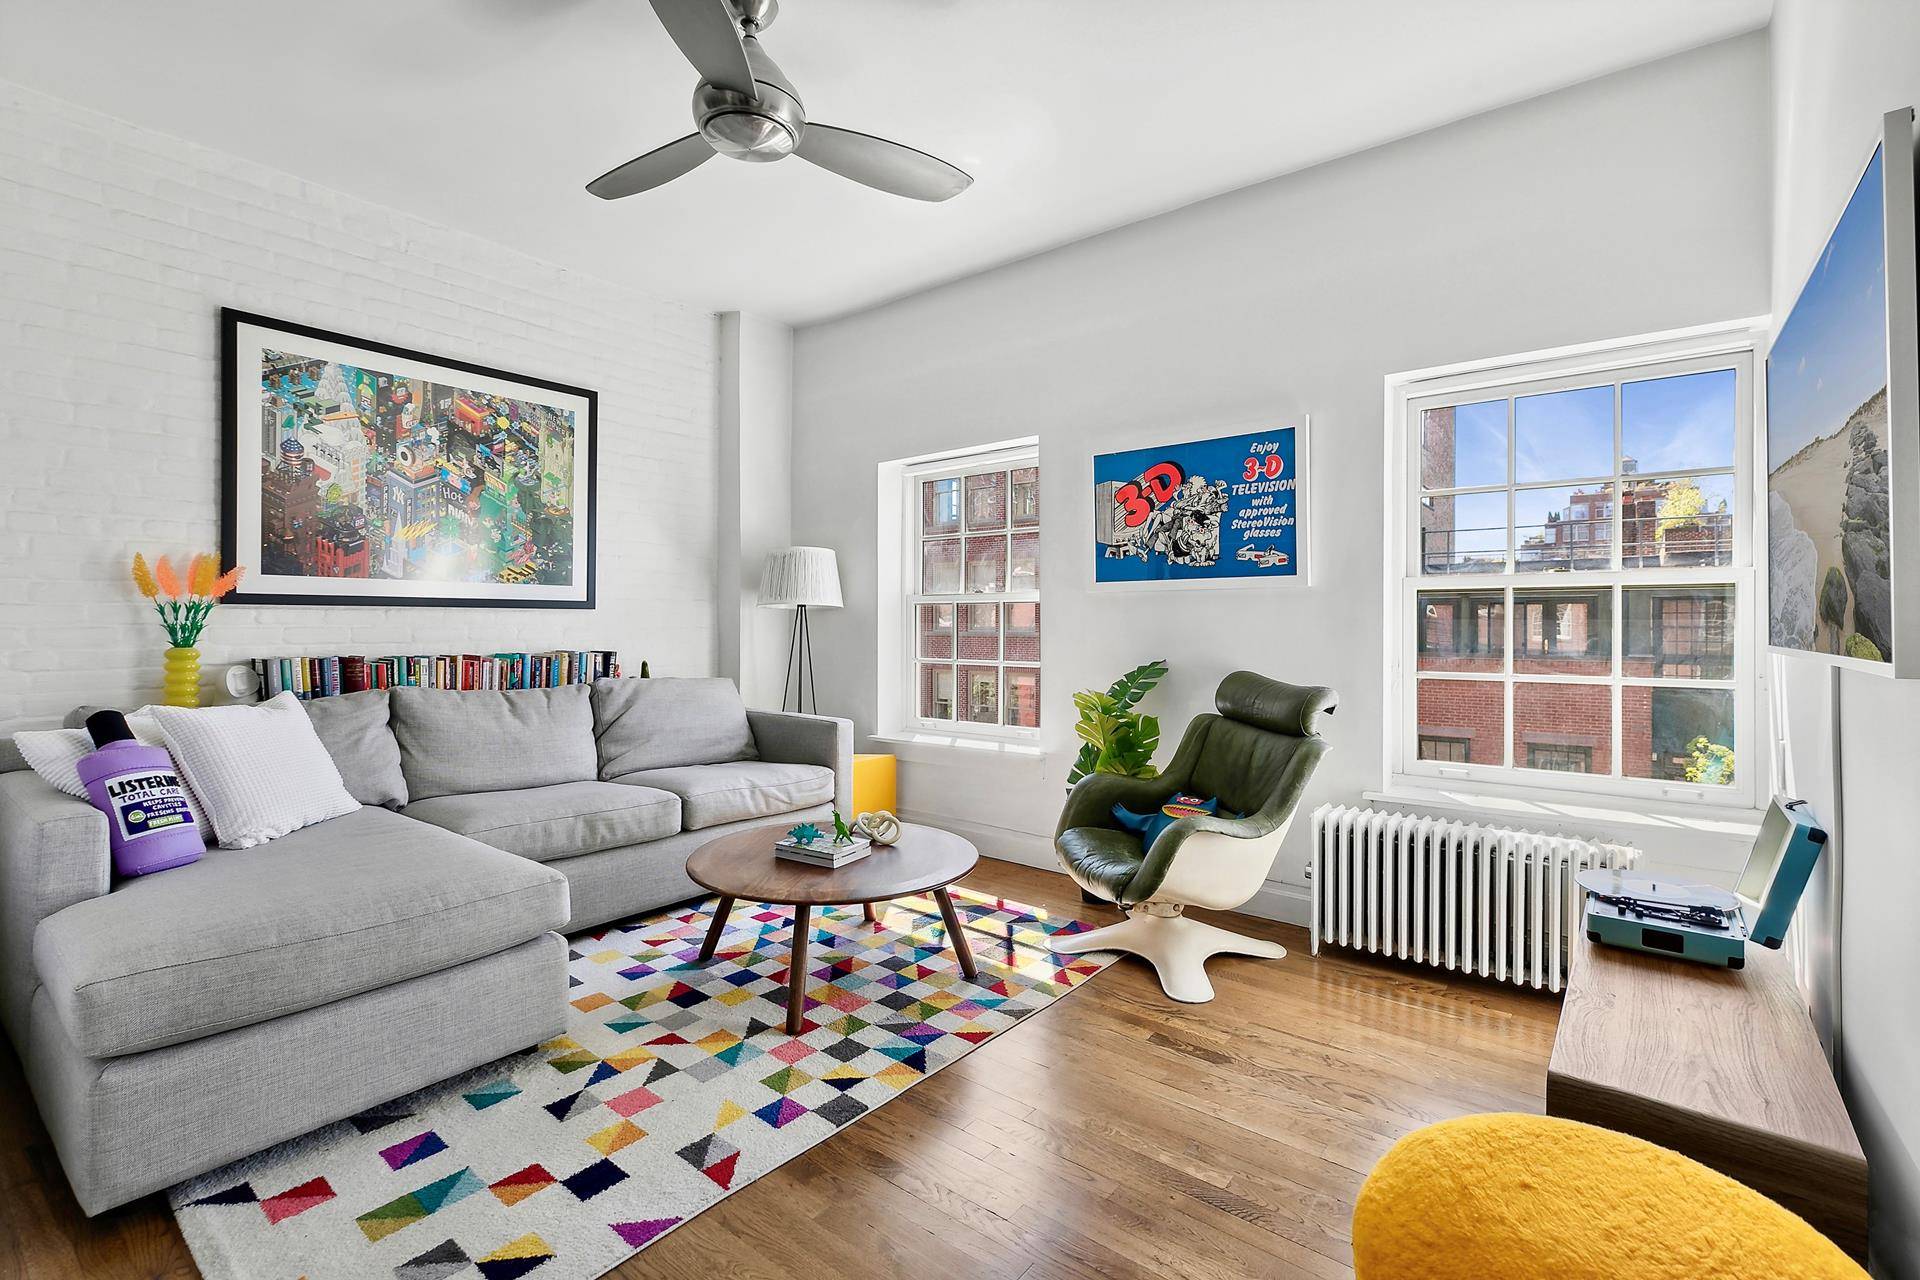 Welcome home to your stunning urban oasis, beautifully situated in what is arguably the most serene and postcard like corner of the West Village.